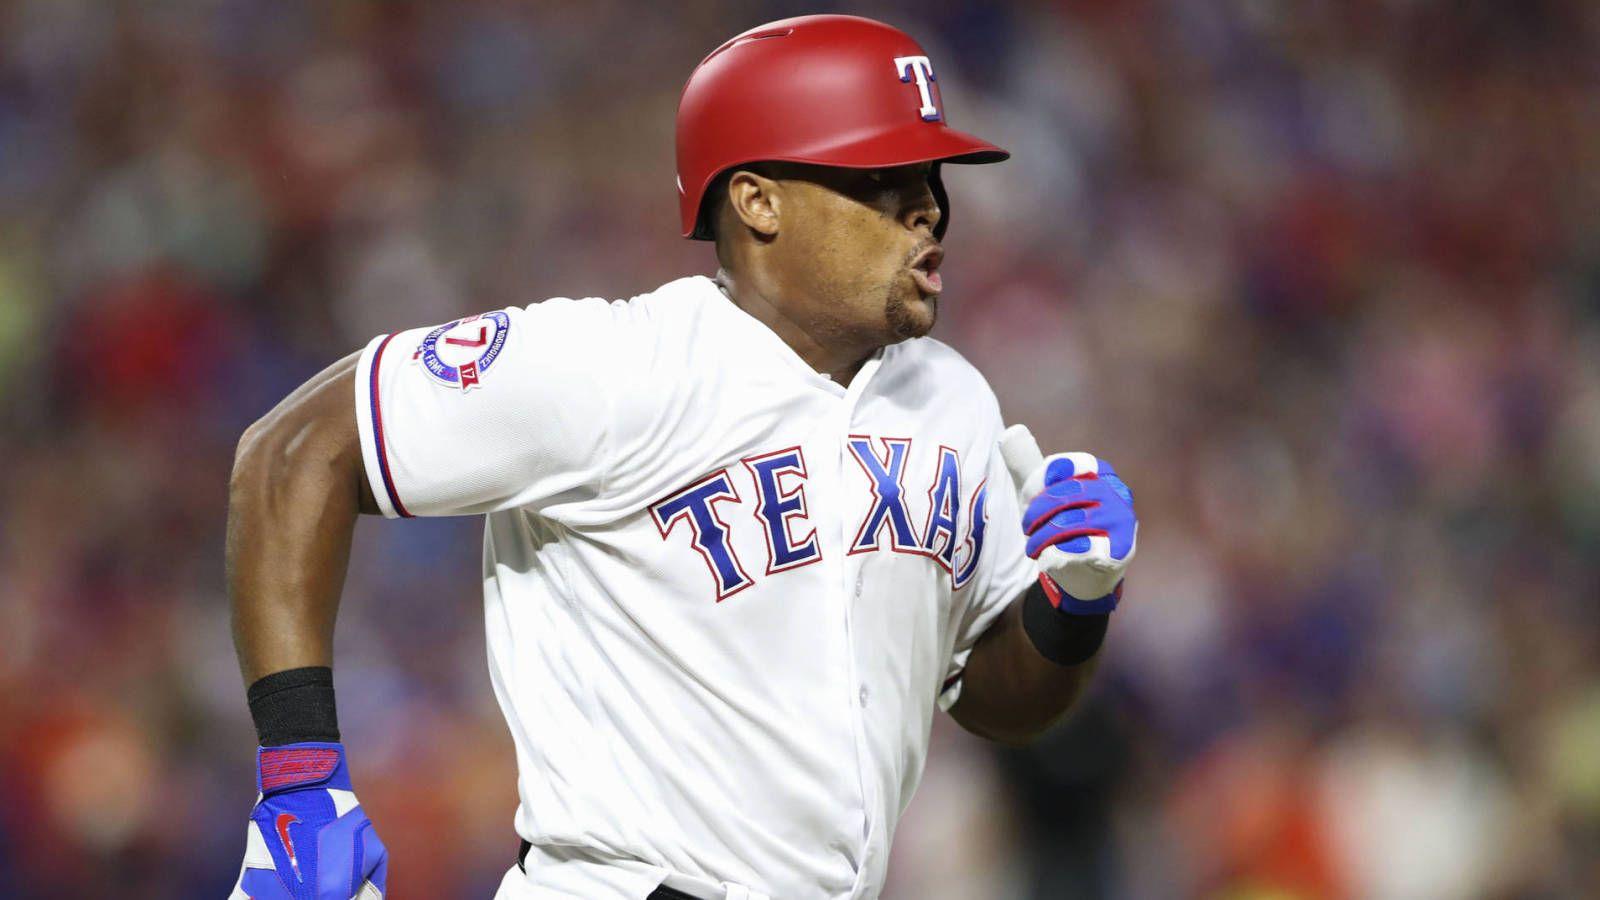 WATCH: Adrian Beltre records 000th hit of his career